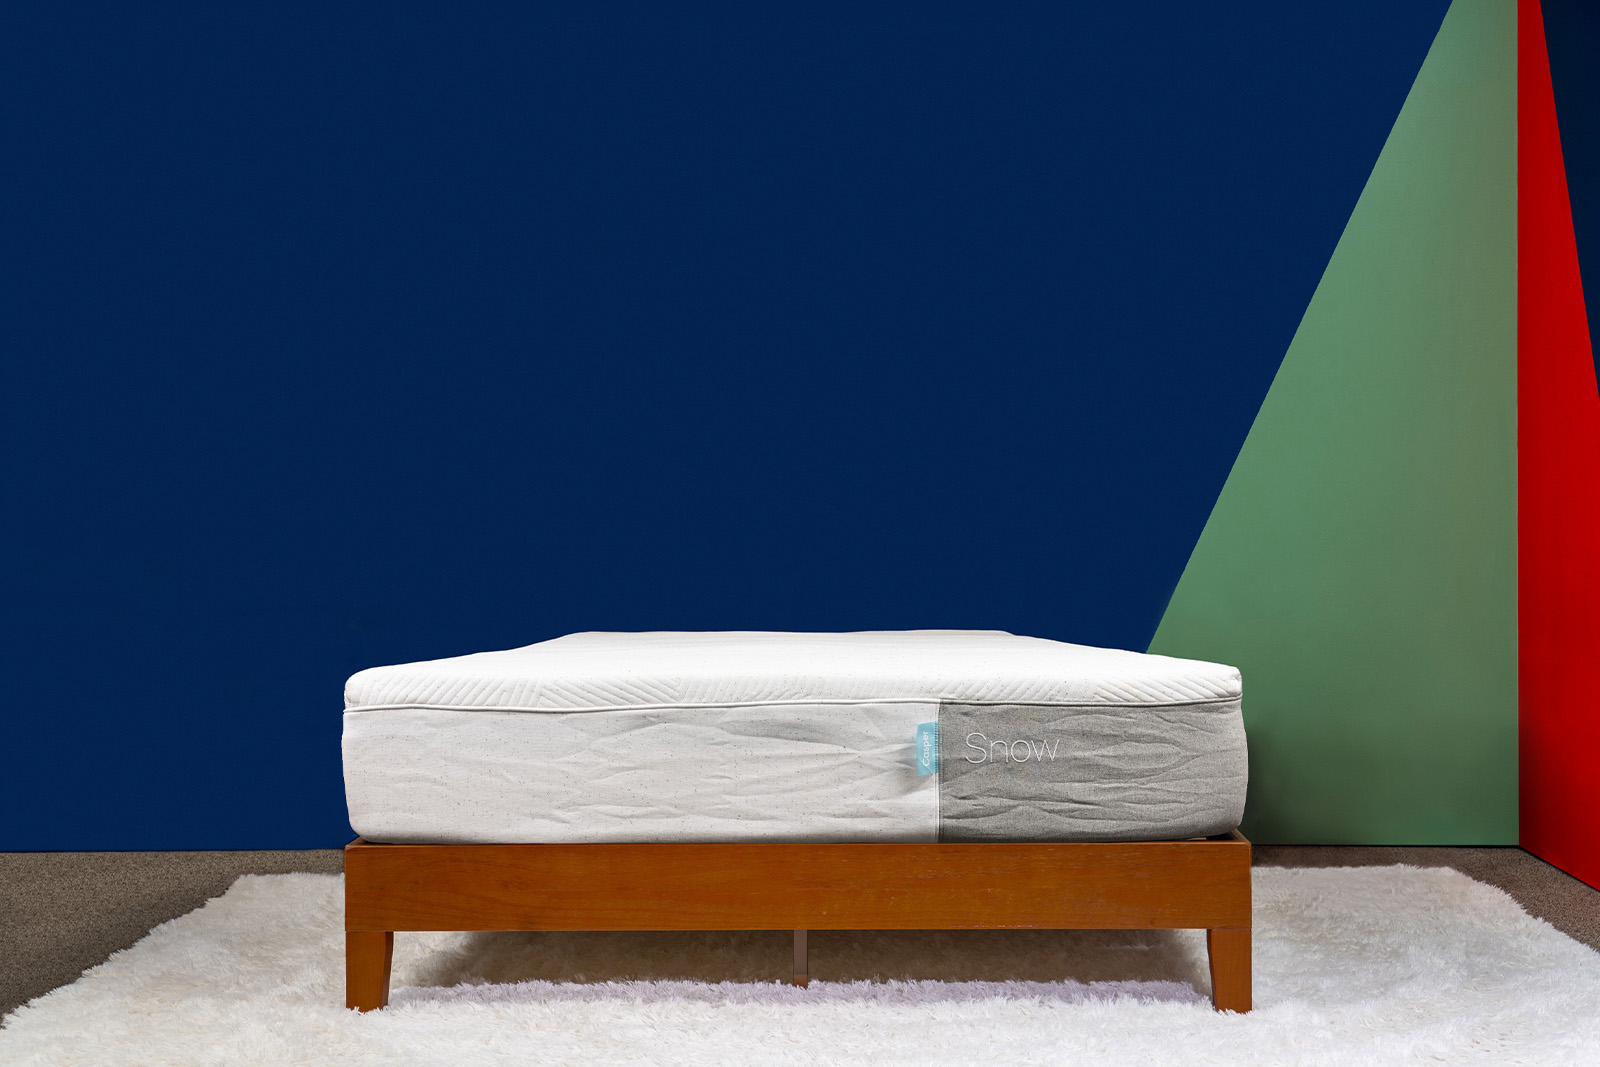 Distant photo of the Casper Snow Mattress on a bedframe in a bedroom taken from a front angle.